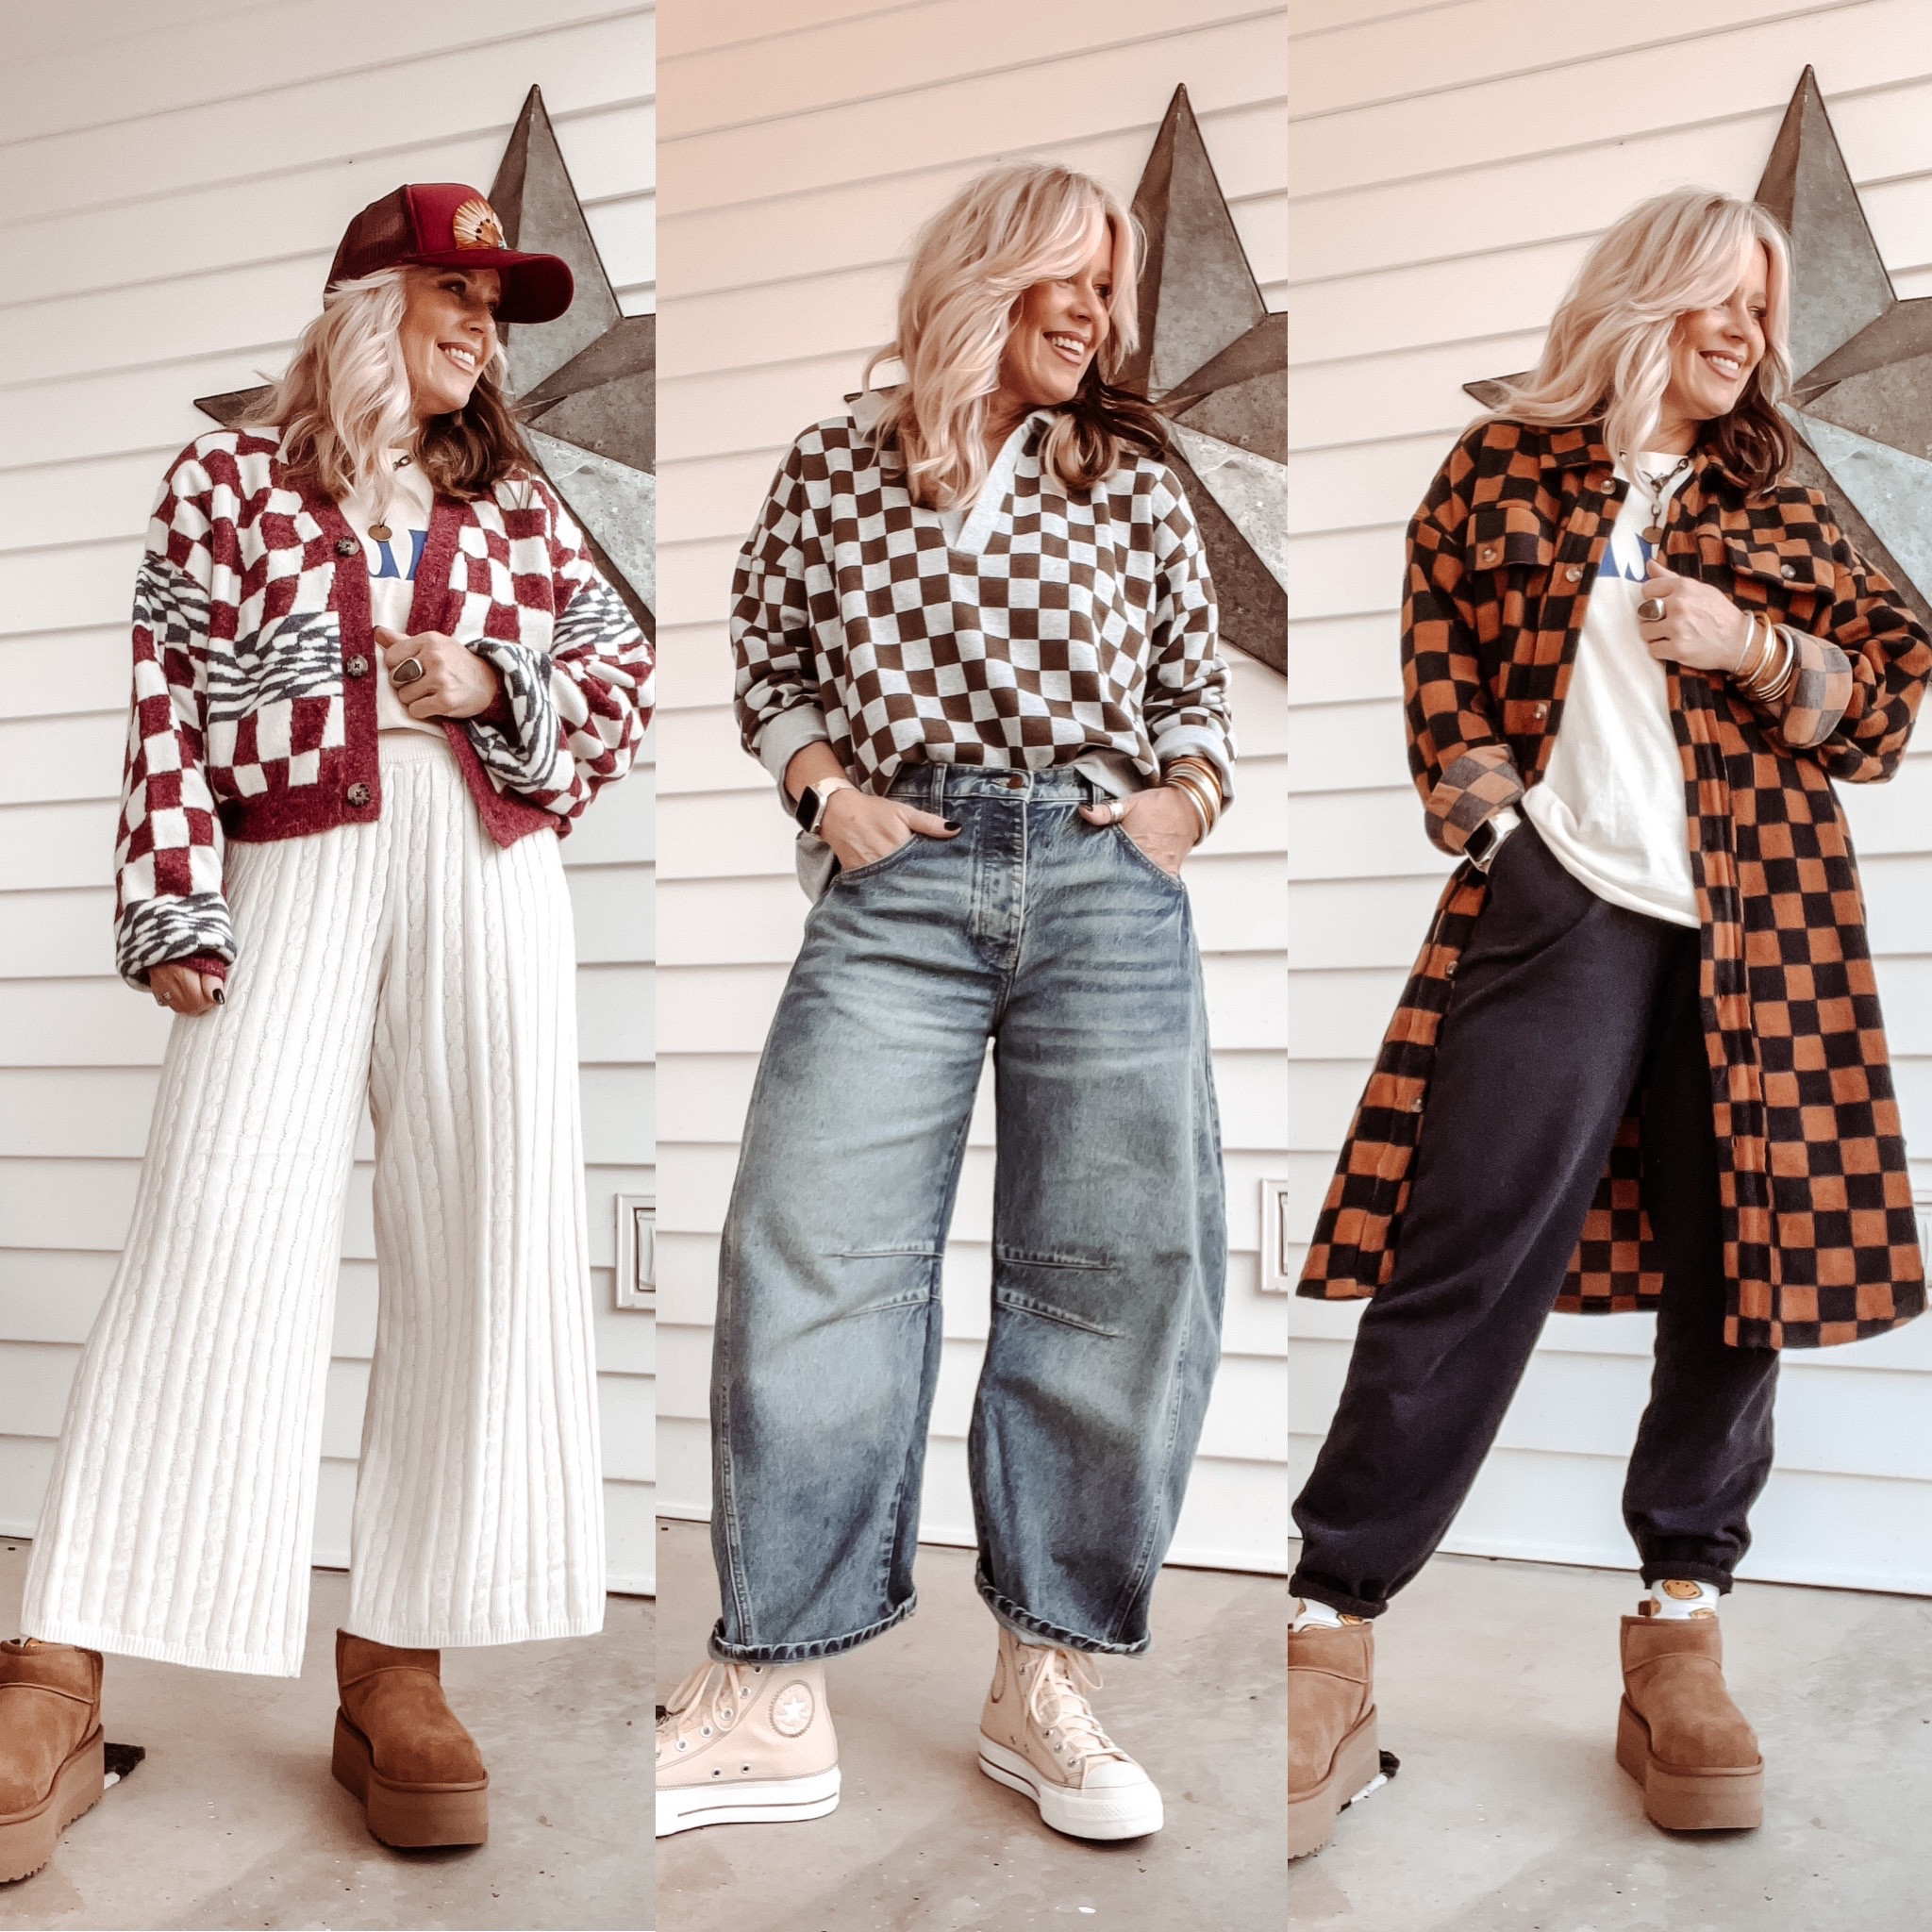 Women's Ascot + Hart Checkered … curated on LTK